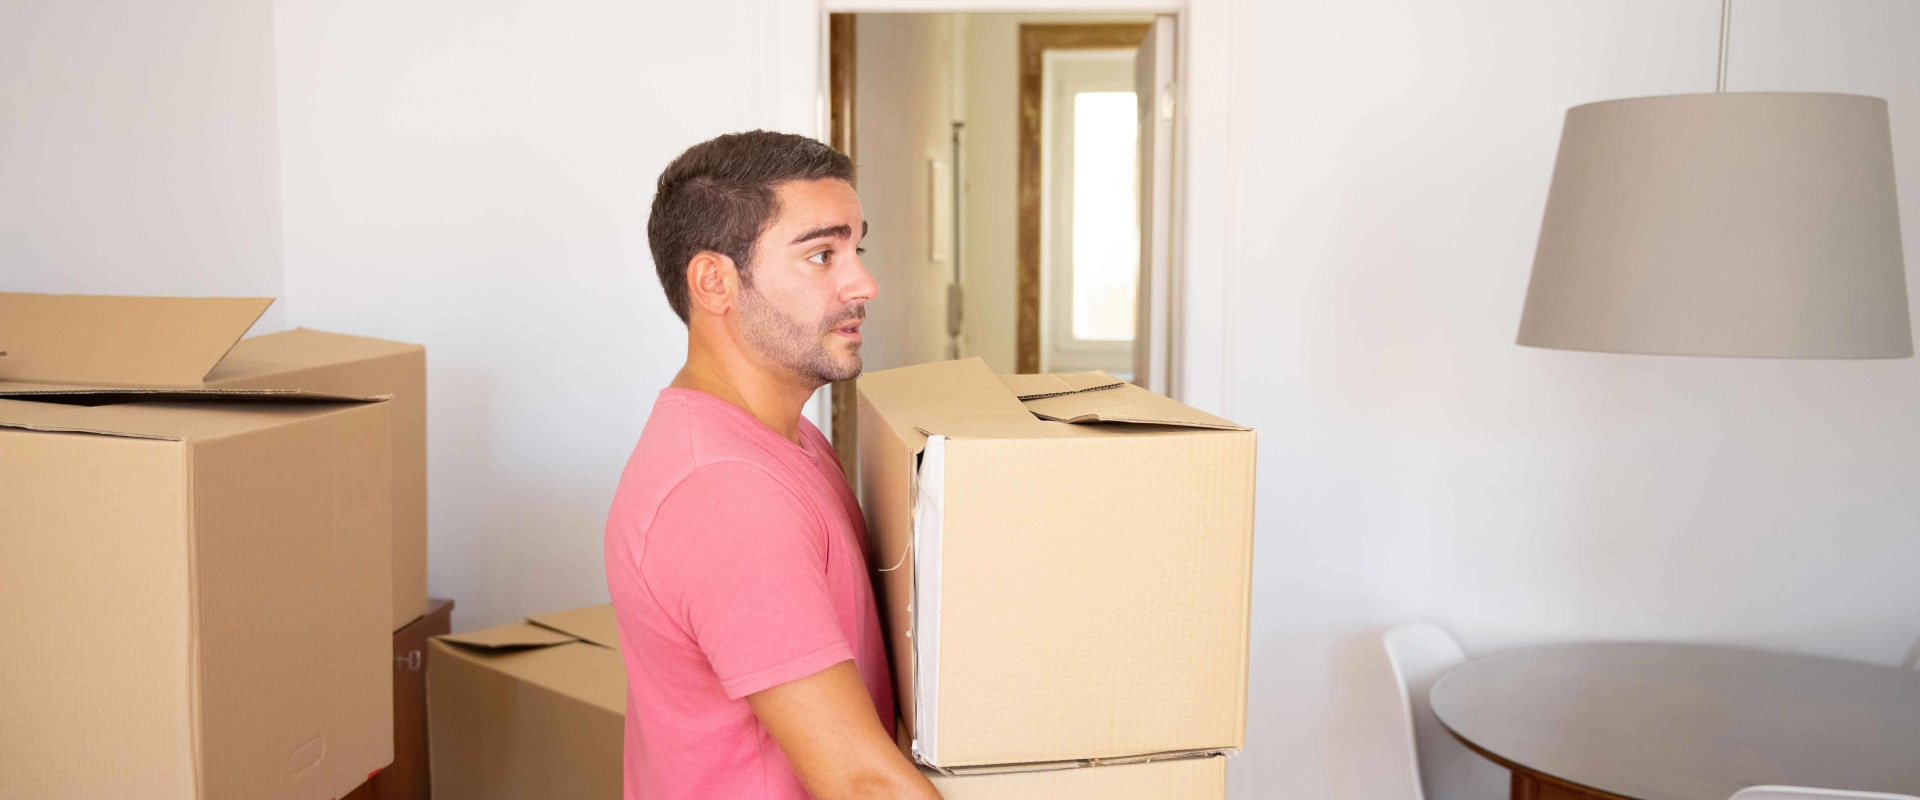 How can i find reliable and affordable movers in my area?